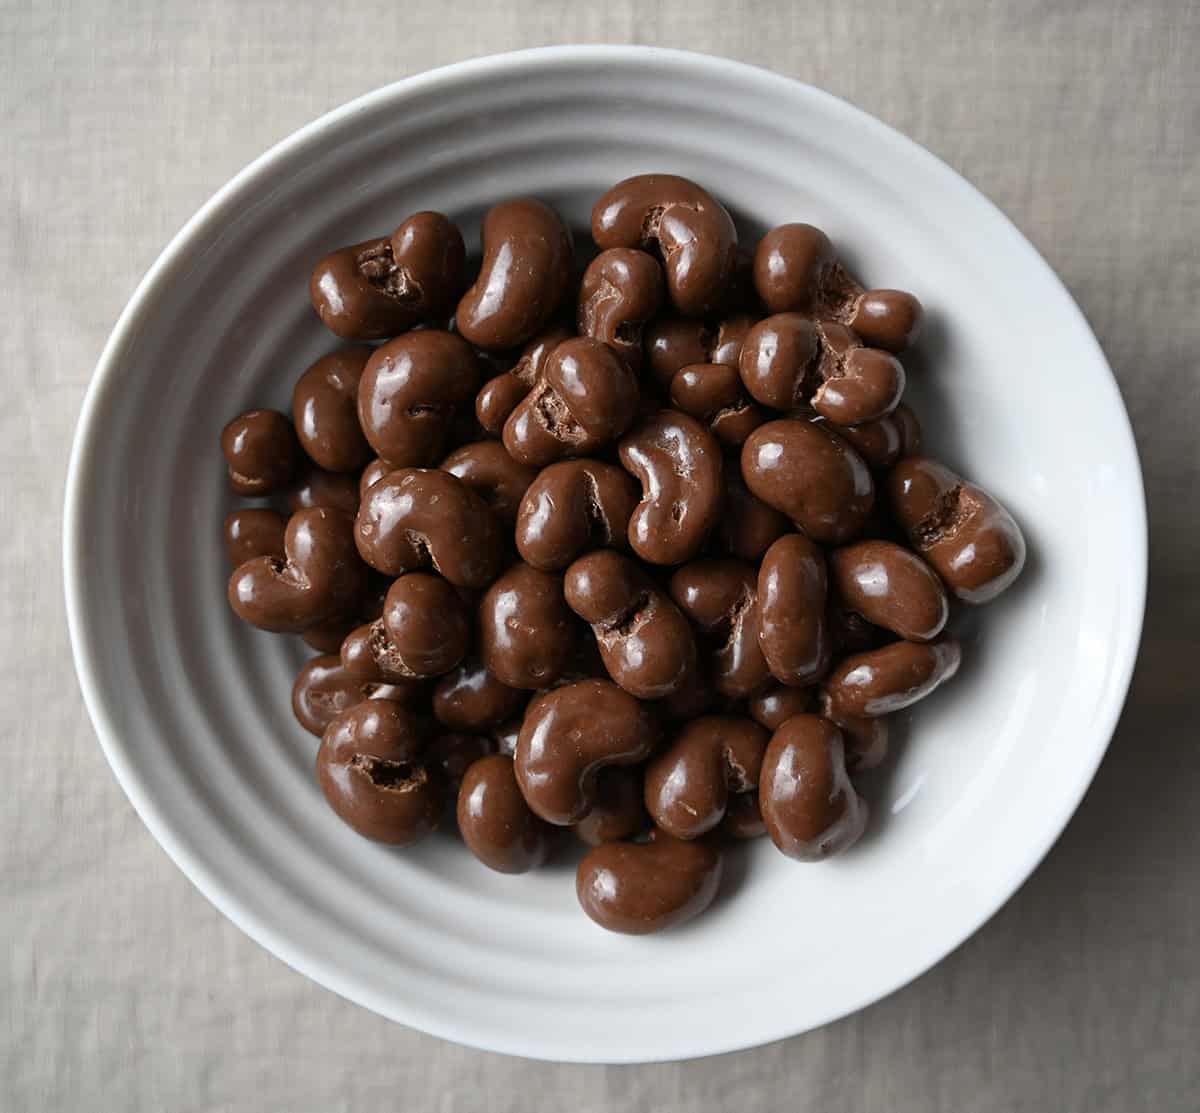 Top down image of a white bowl full of chocolate covered cashews. 